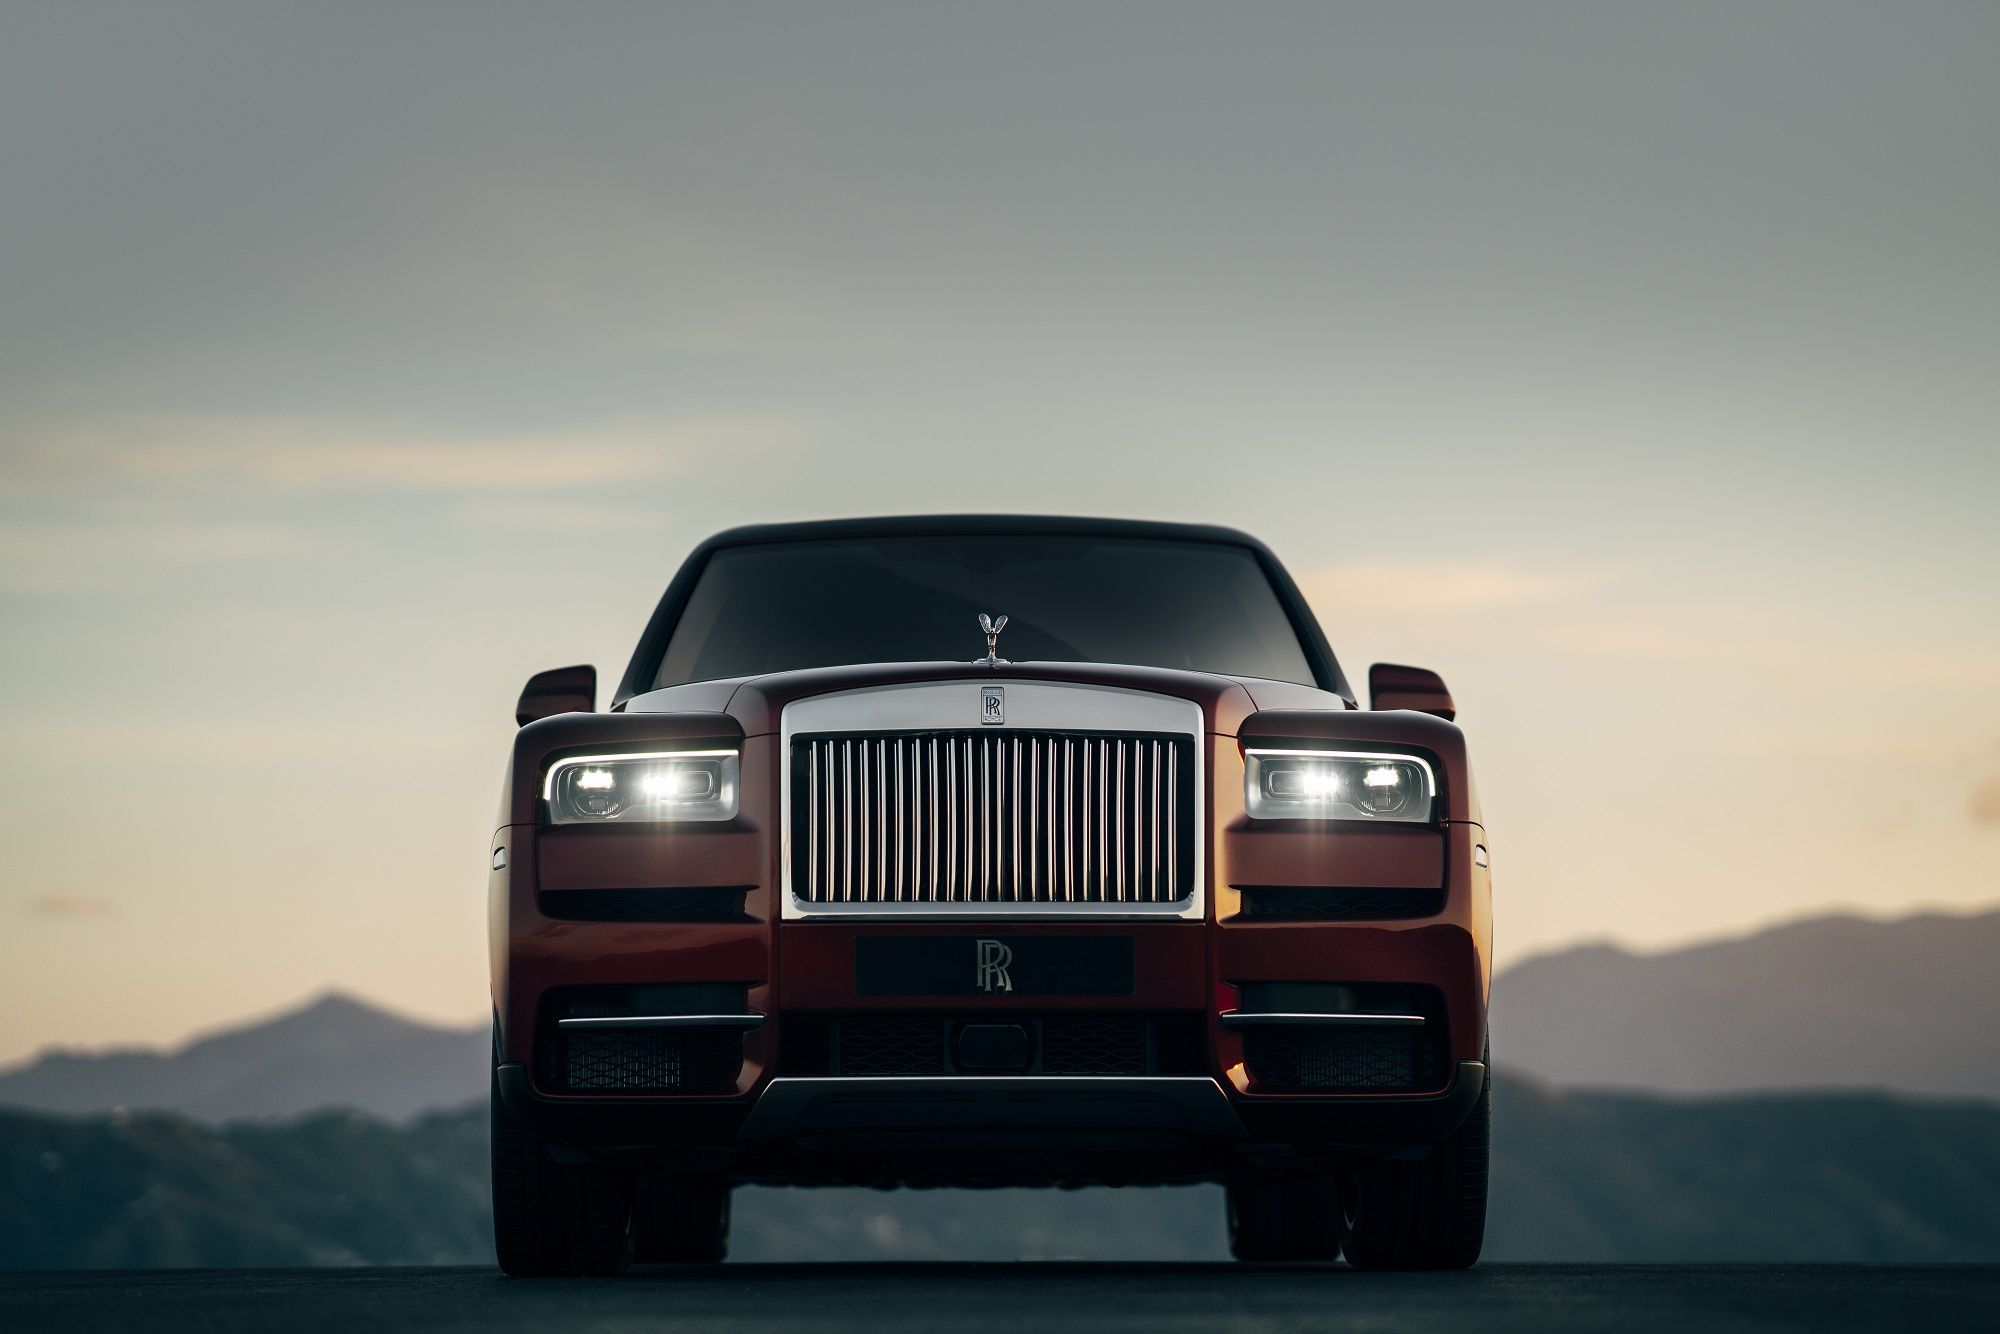 The Rolls-Royce Cullinan SUV makes its worldwide debut